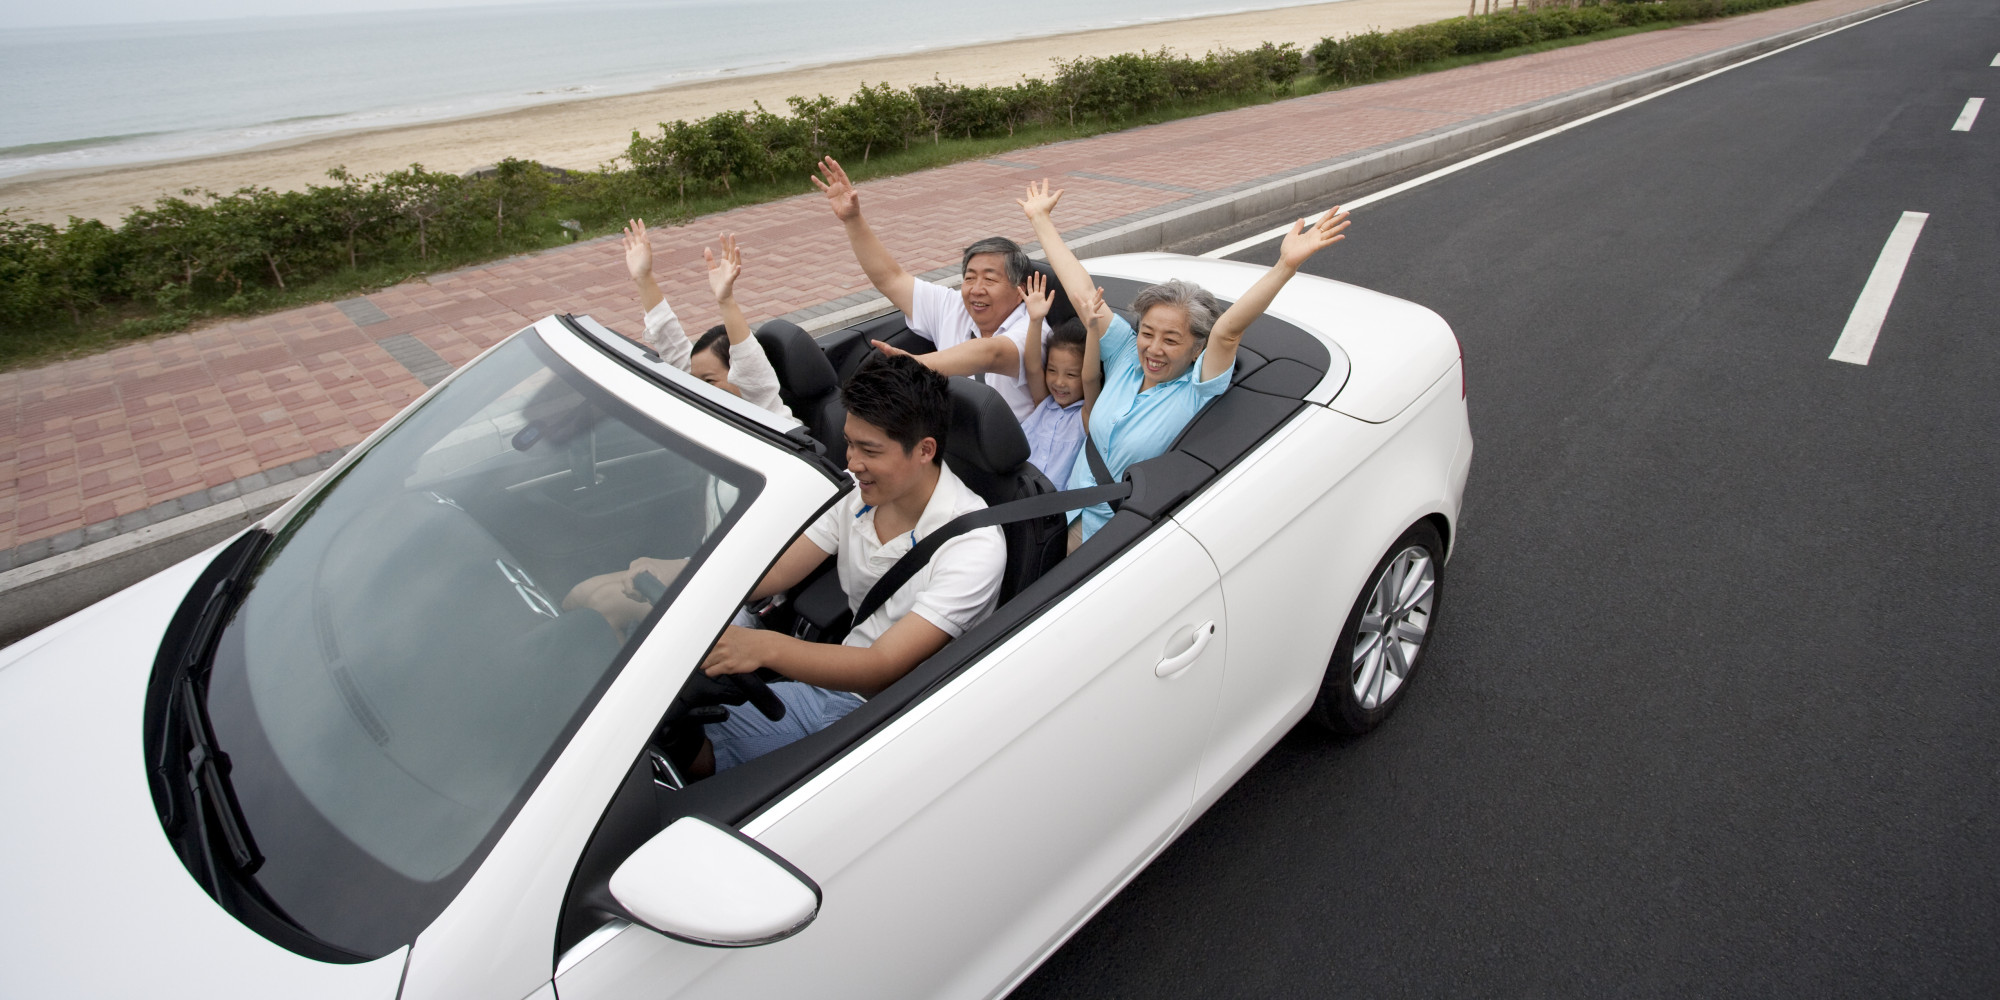 Expert Rent A Car - Discover The Perks Of Renting A Car - Travelogues Blog